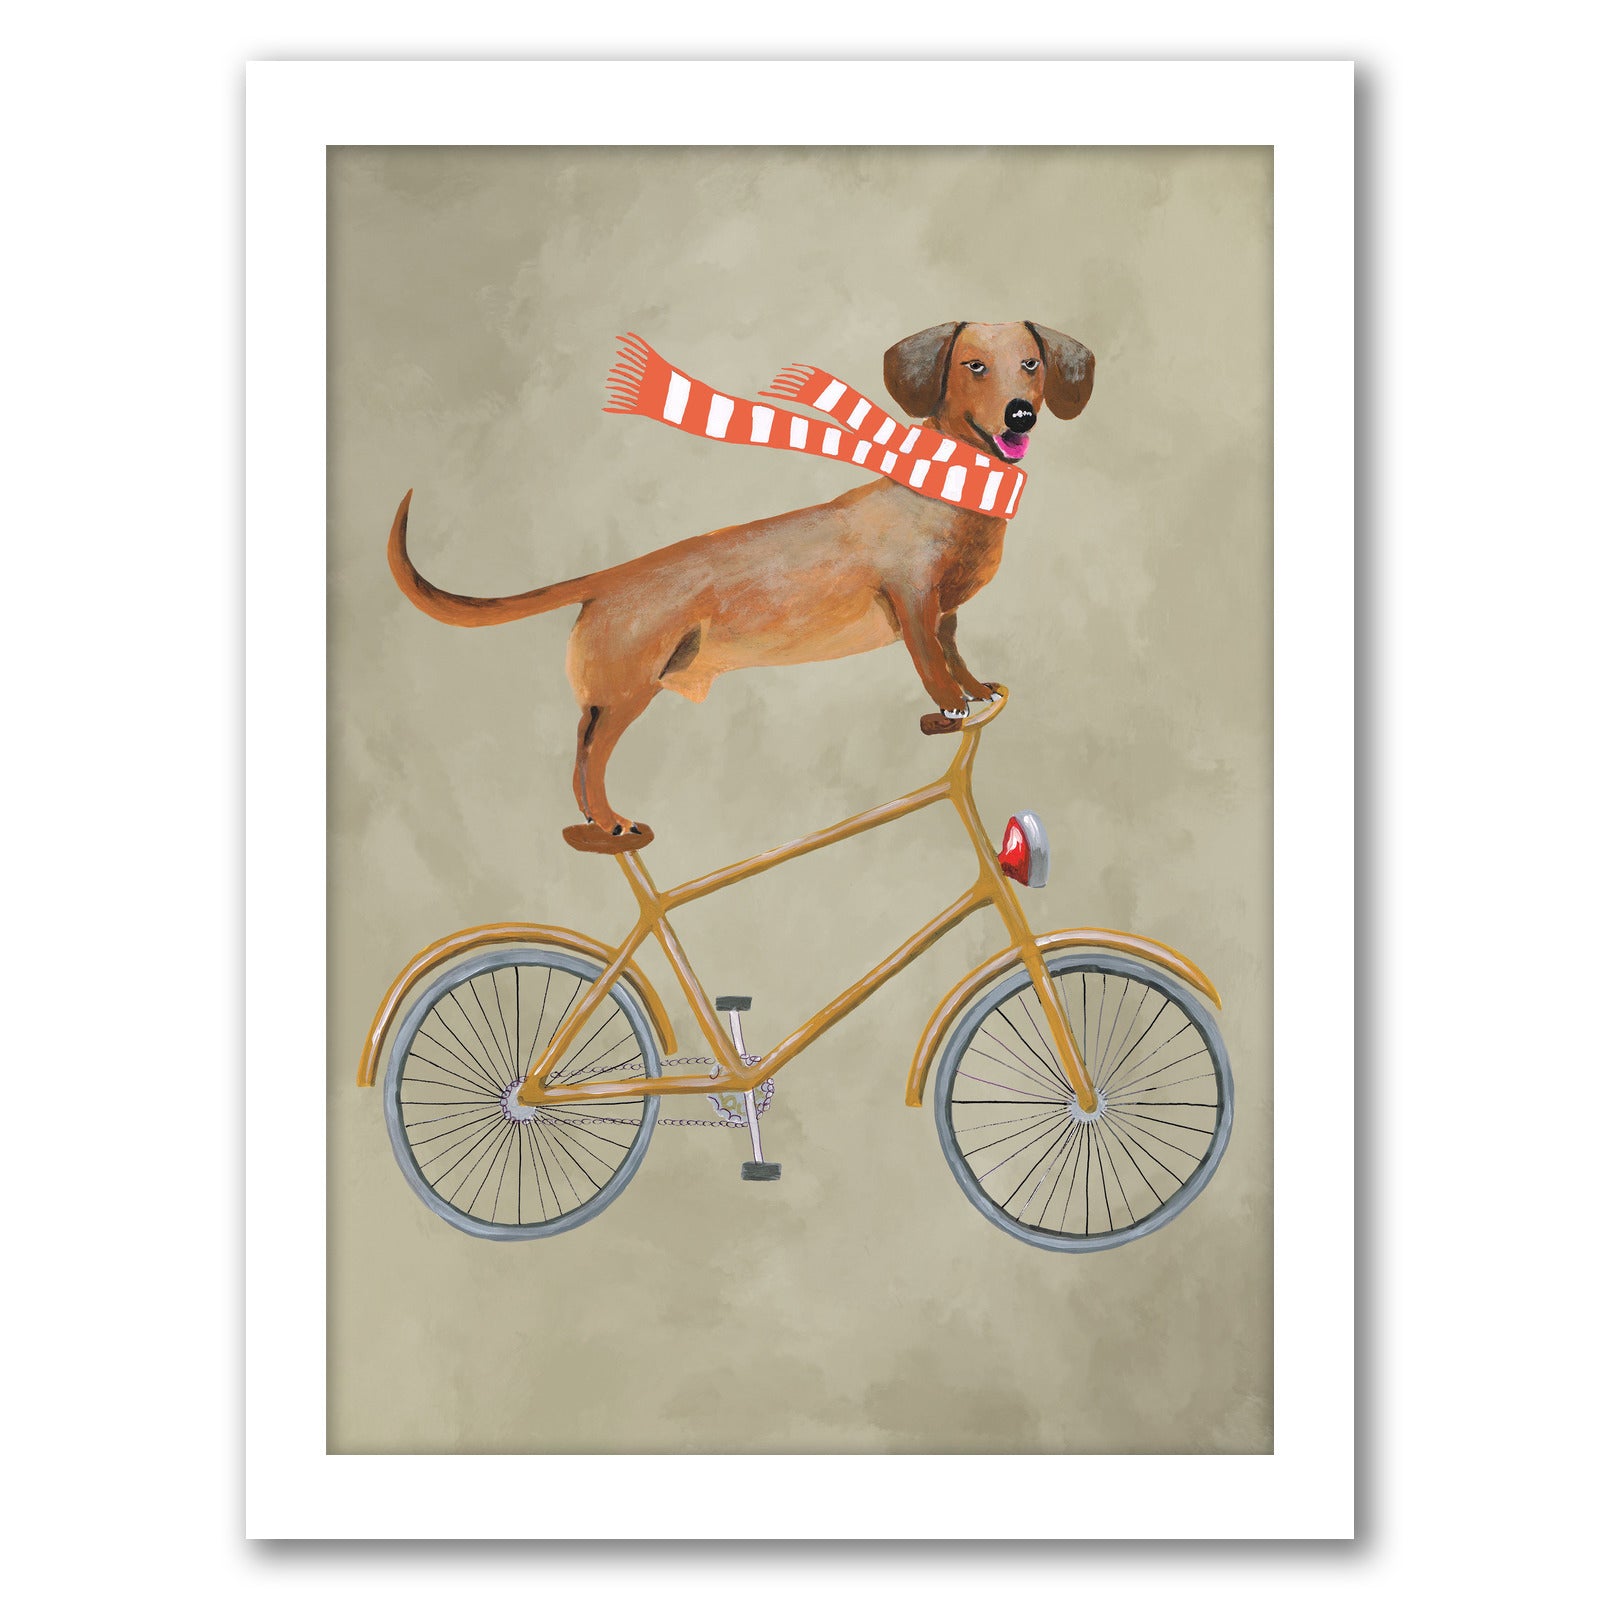 Daschund On Bicycle By Coco De Paris - Framed Print